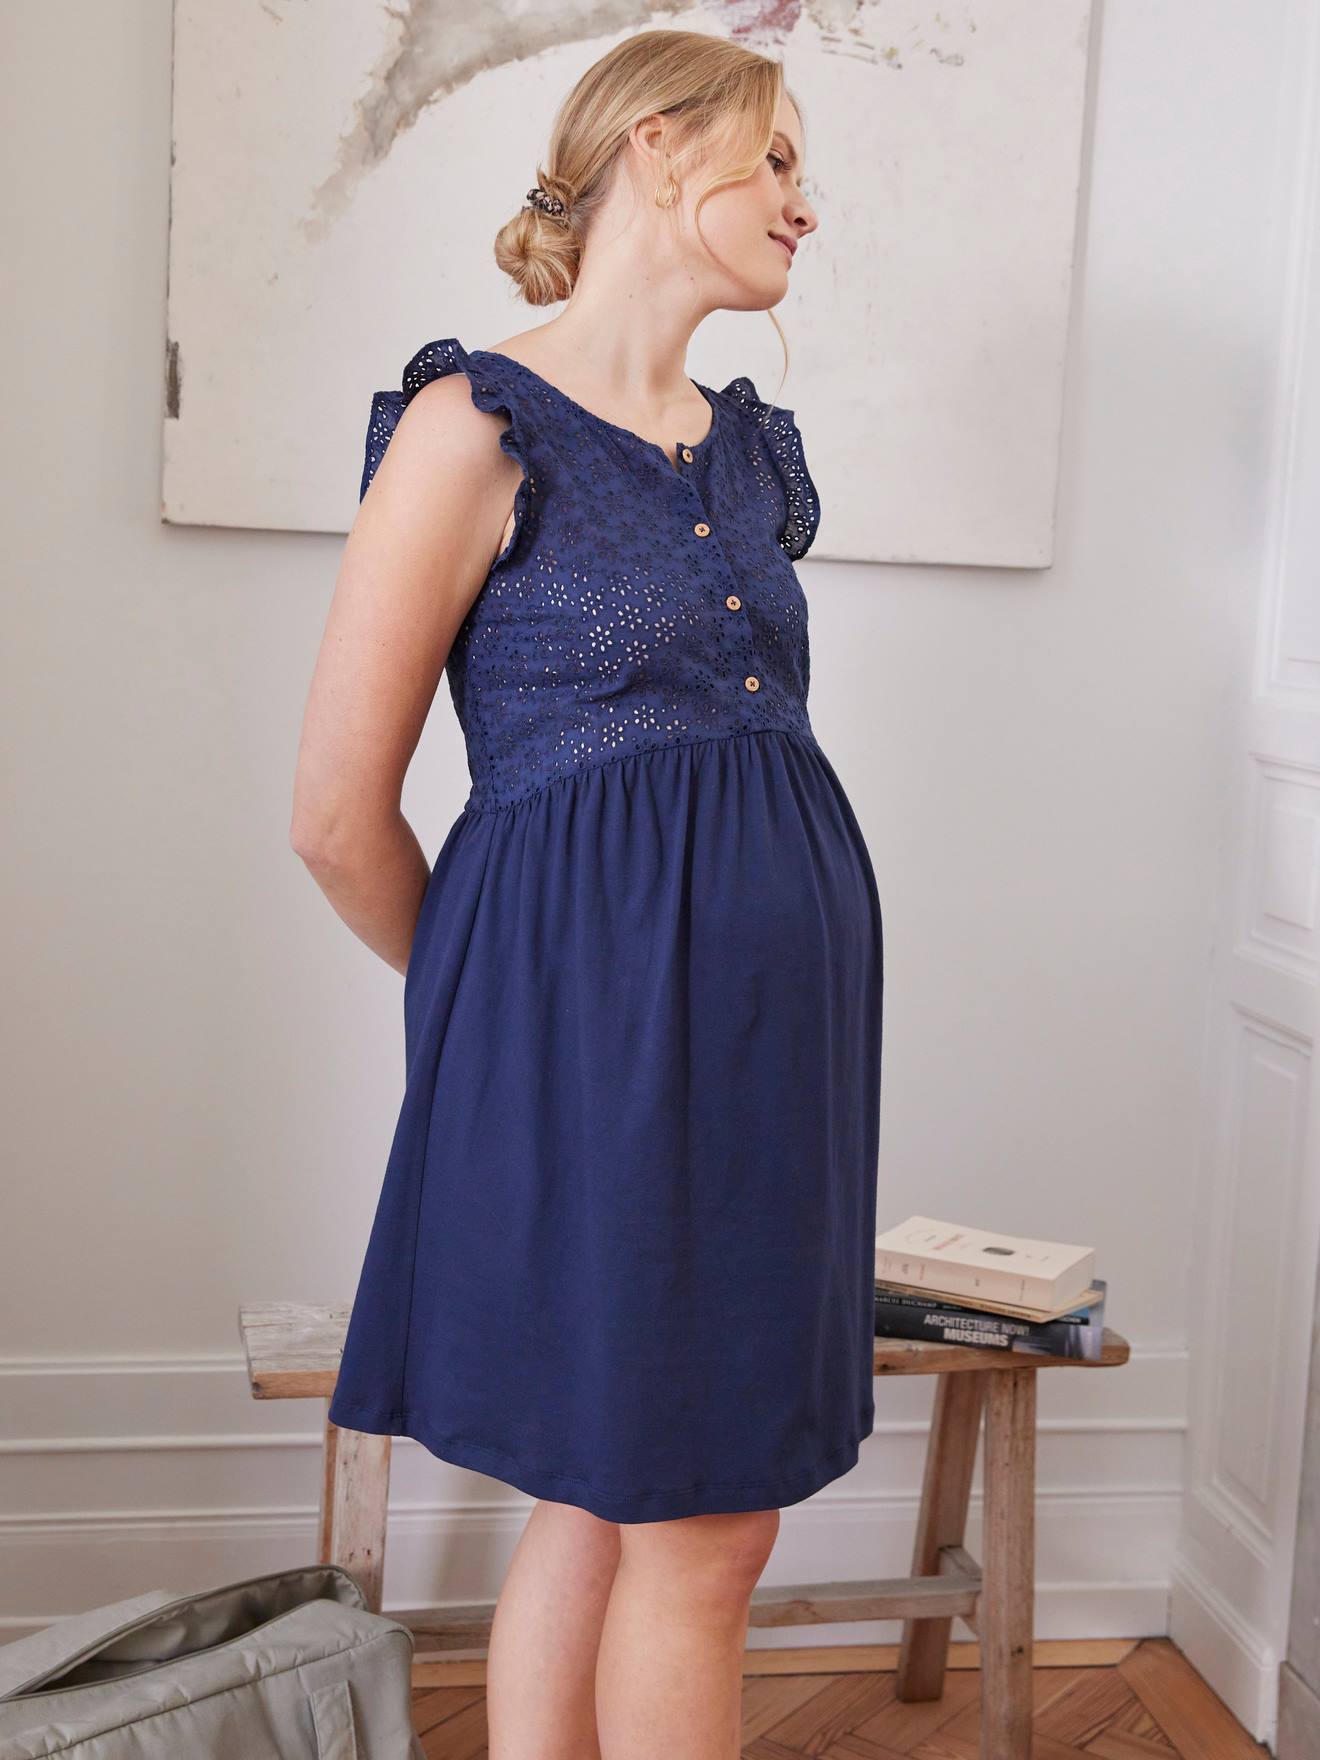 Short Dress in Jersey Knit & Broderie Anglaise, Maternity & Nursing Special navy blue